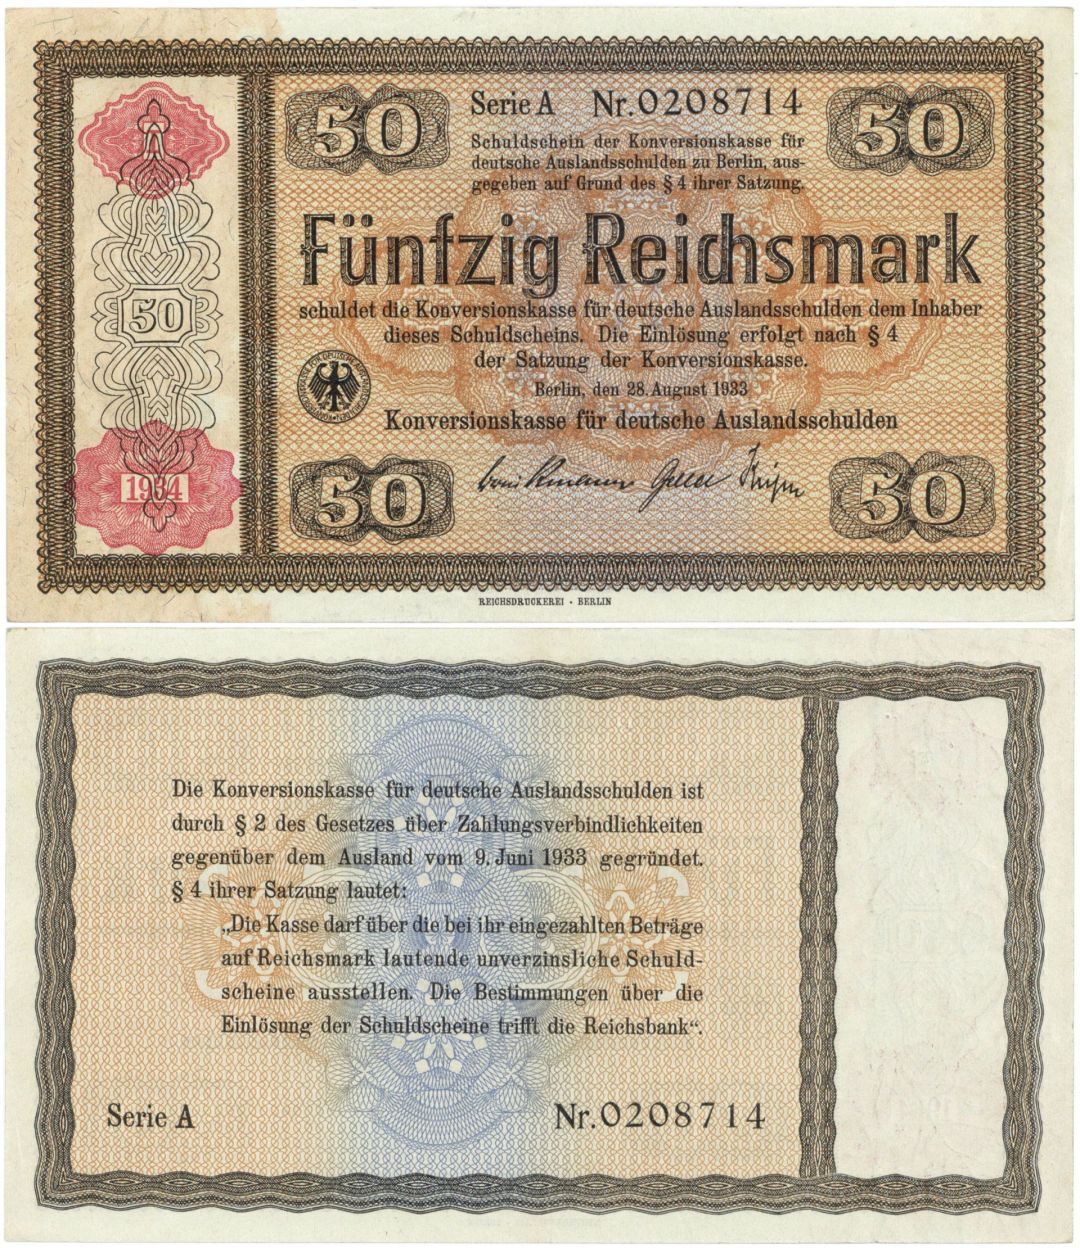 Germany - 50 German Reichsmark - P-211 - 1934 dated Foreign Paper Money - Paper 